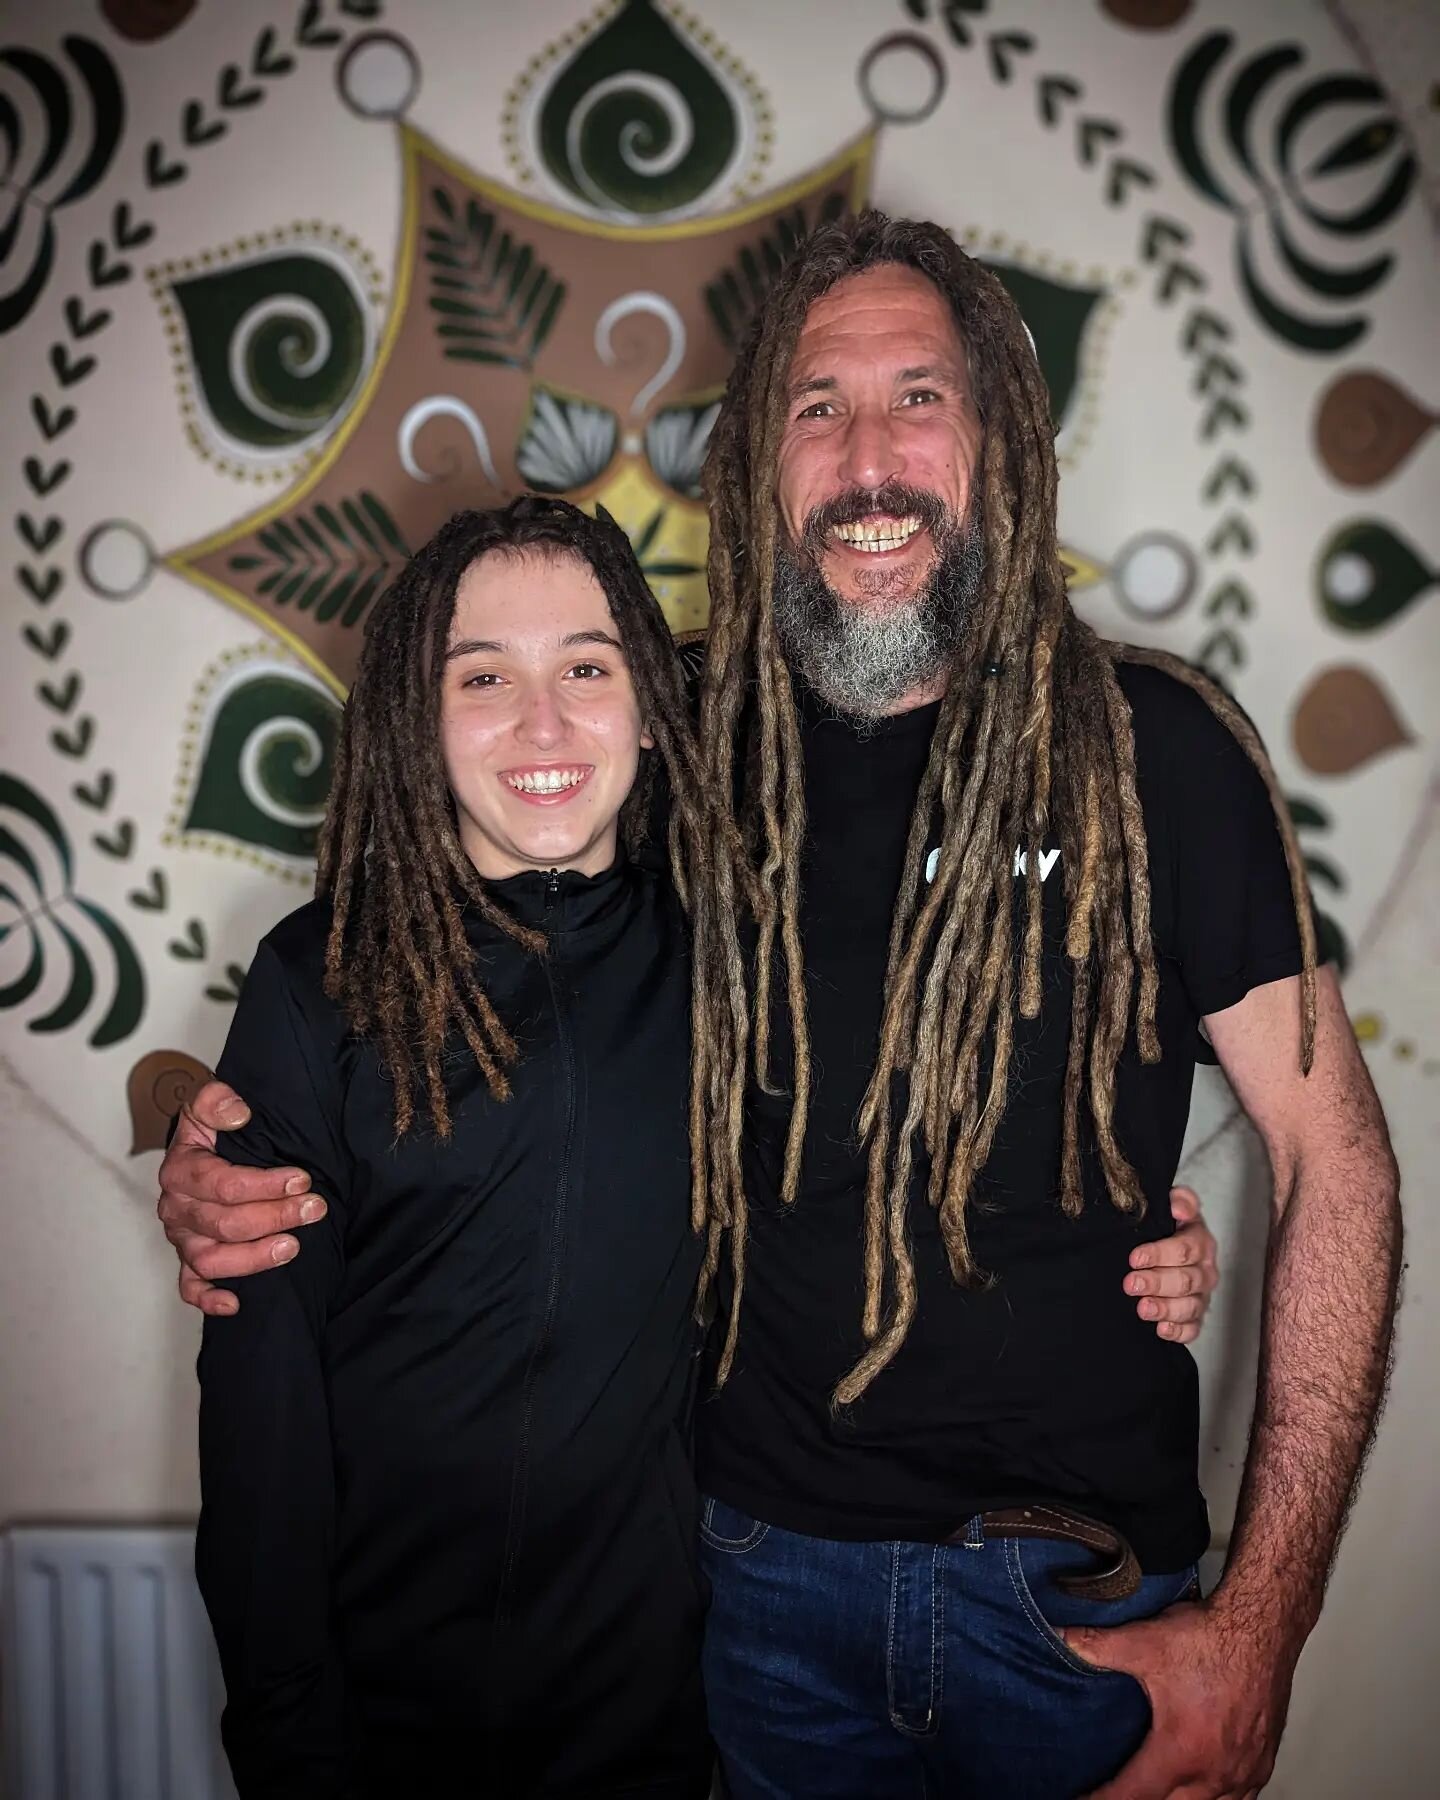 Client appreciation post!

Levi has been coming to me to get his dreads looked after for 5 or 6 years now. 

A few years ago his son wanted to get dreads too so I created locs for him.  Now I look after both of their heads of locs. 

I love our appoi